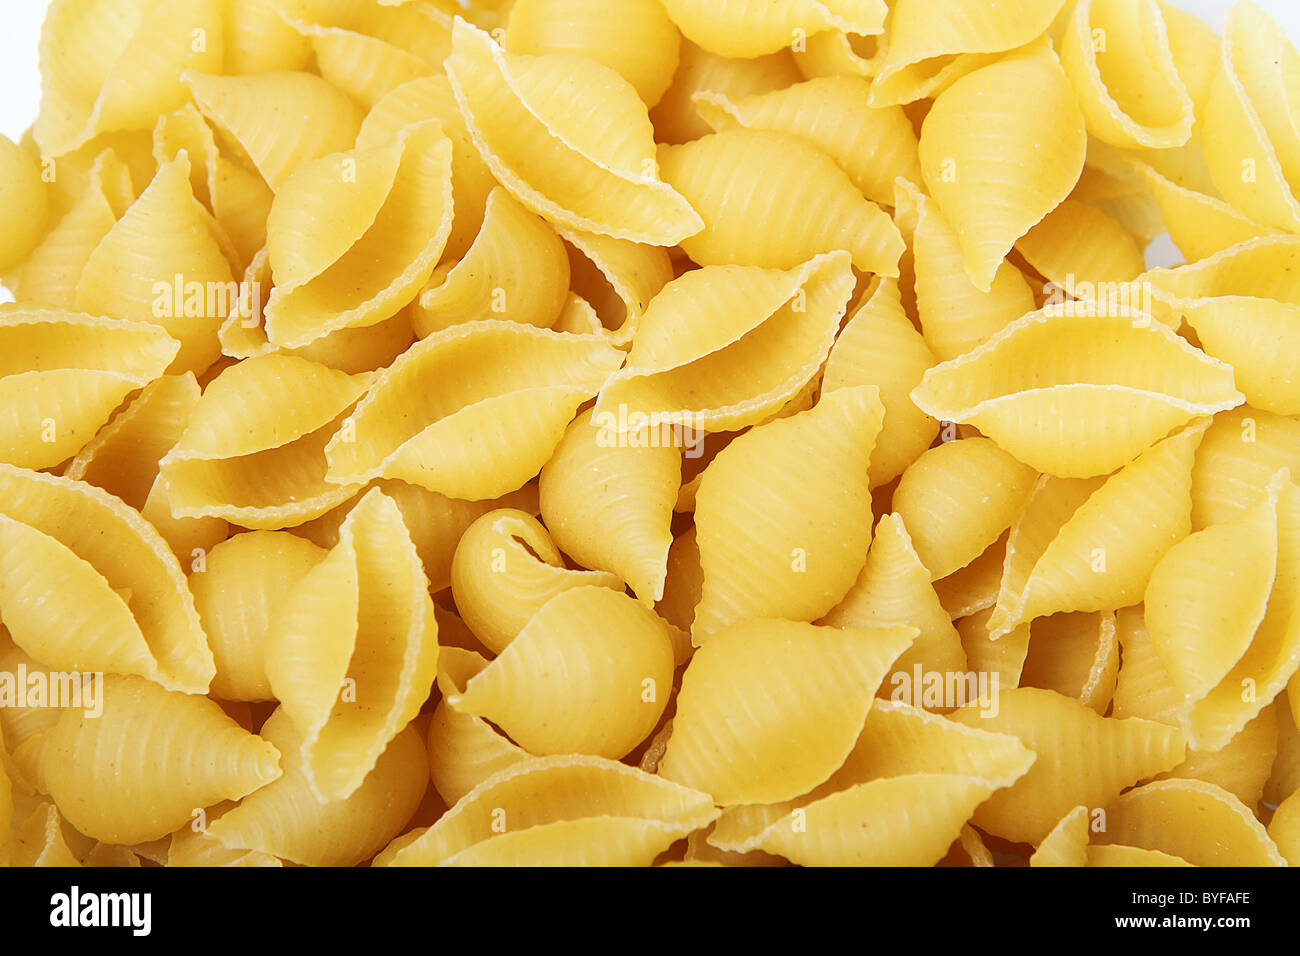 Close-up of uncooked golden yellow pasta Stock Photo